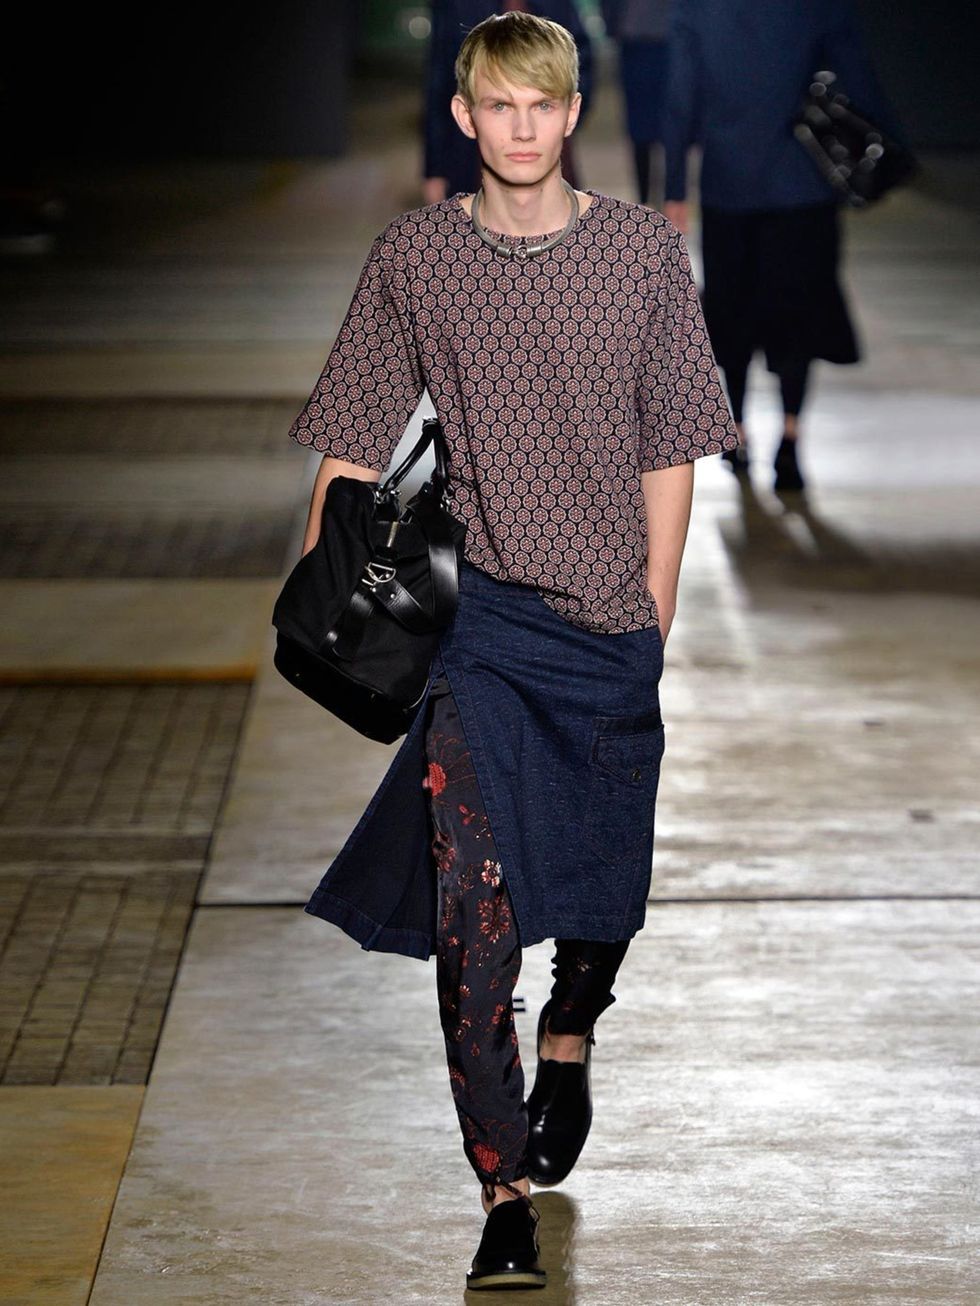 <p>Dries van Noten</p>

<p>Don't be afraid to clash your patterns, especially if you stick to similar tones. If in doubt a bit of block colour will tie your look together.</p>